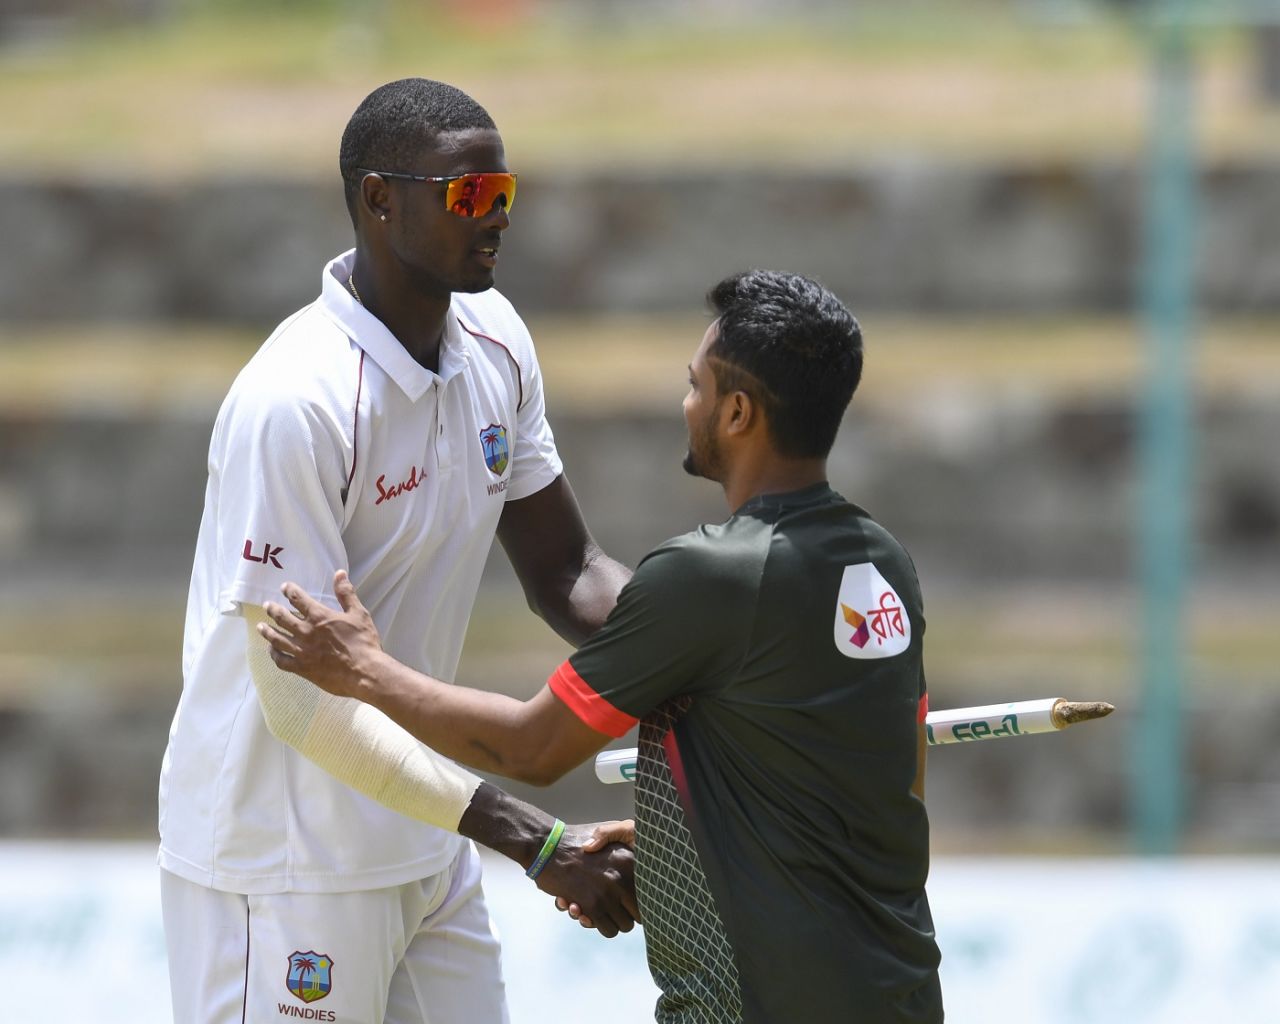 Jason Holder and Shakib Al Hasan shake hands after the first Test, West Indies v Bangladesh, 1st Test, North Sound, 2nd day, July 6, 2018